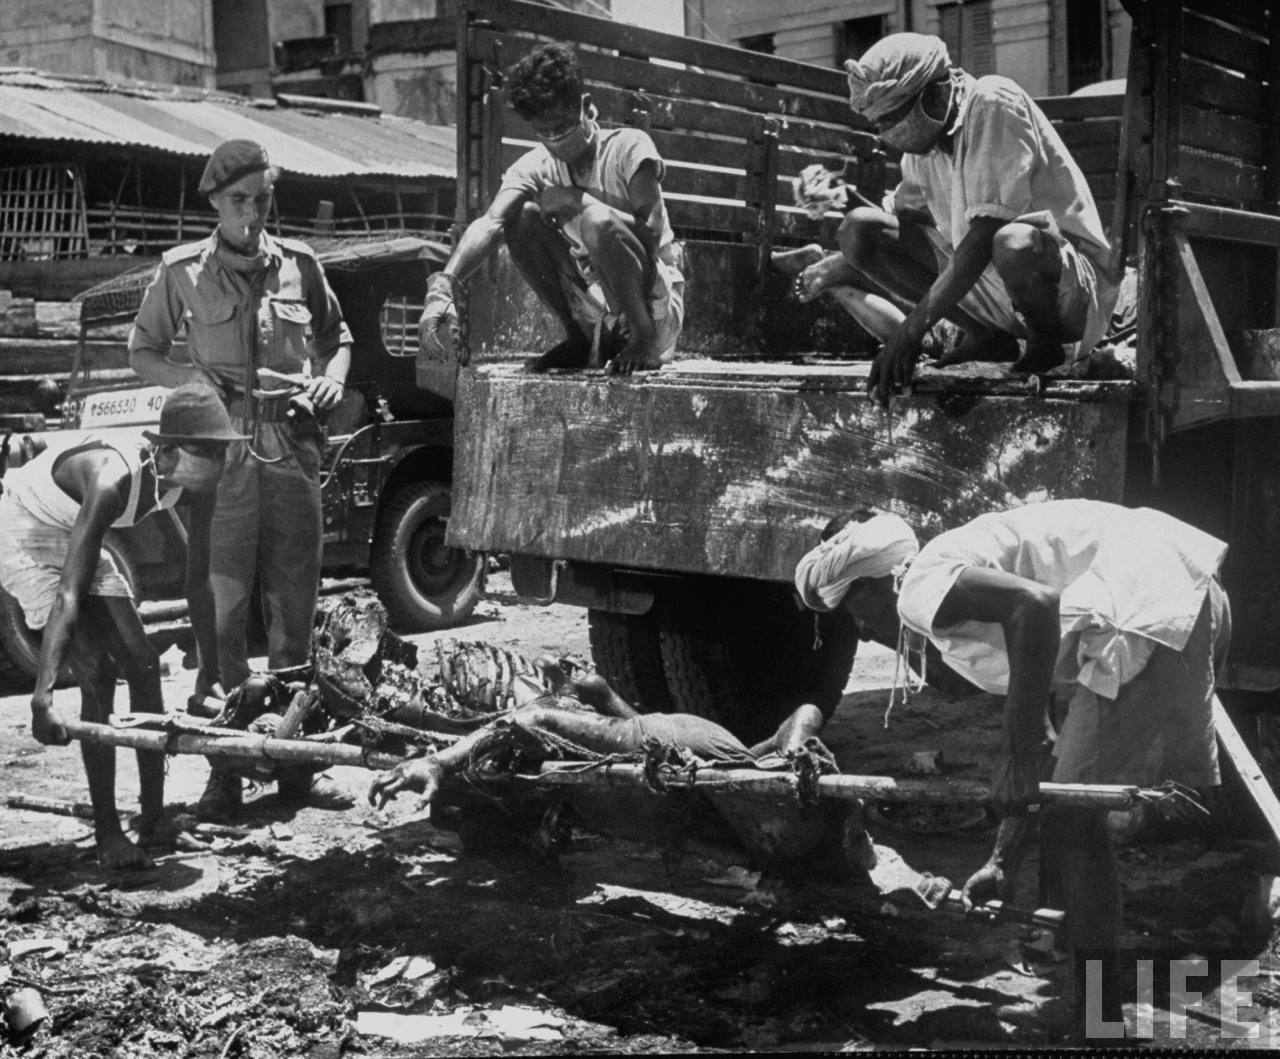 Men unloading corpses from truck in preparation for cremation